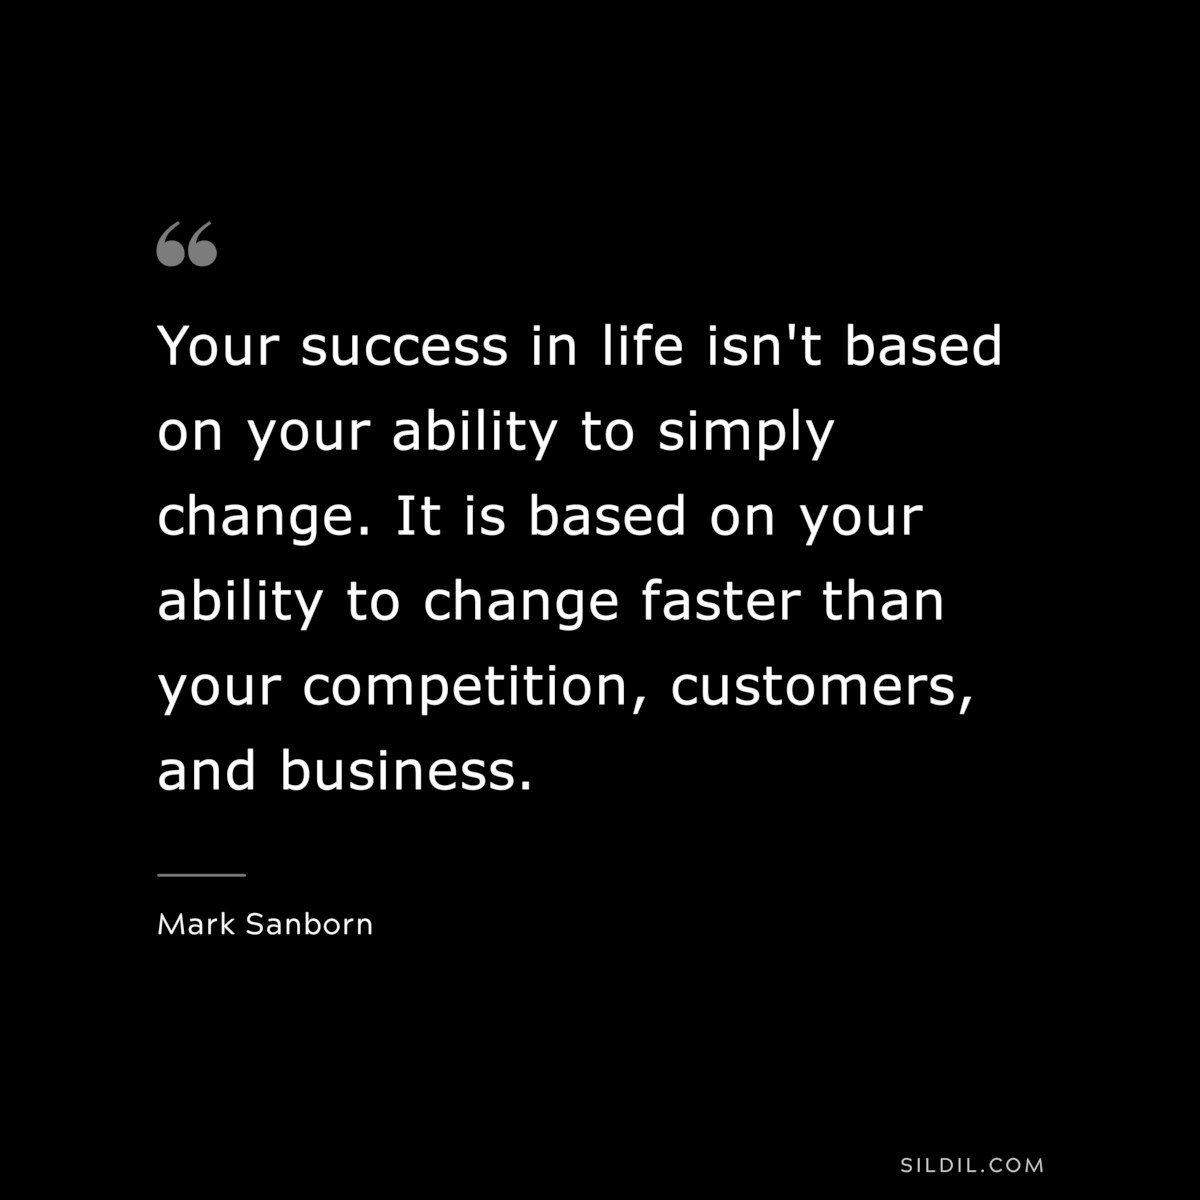 Your success in life isn't based on your ability to simply change. It is based on your ability to change faster than your competition, customers, and business. ― Mark Sanborn